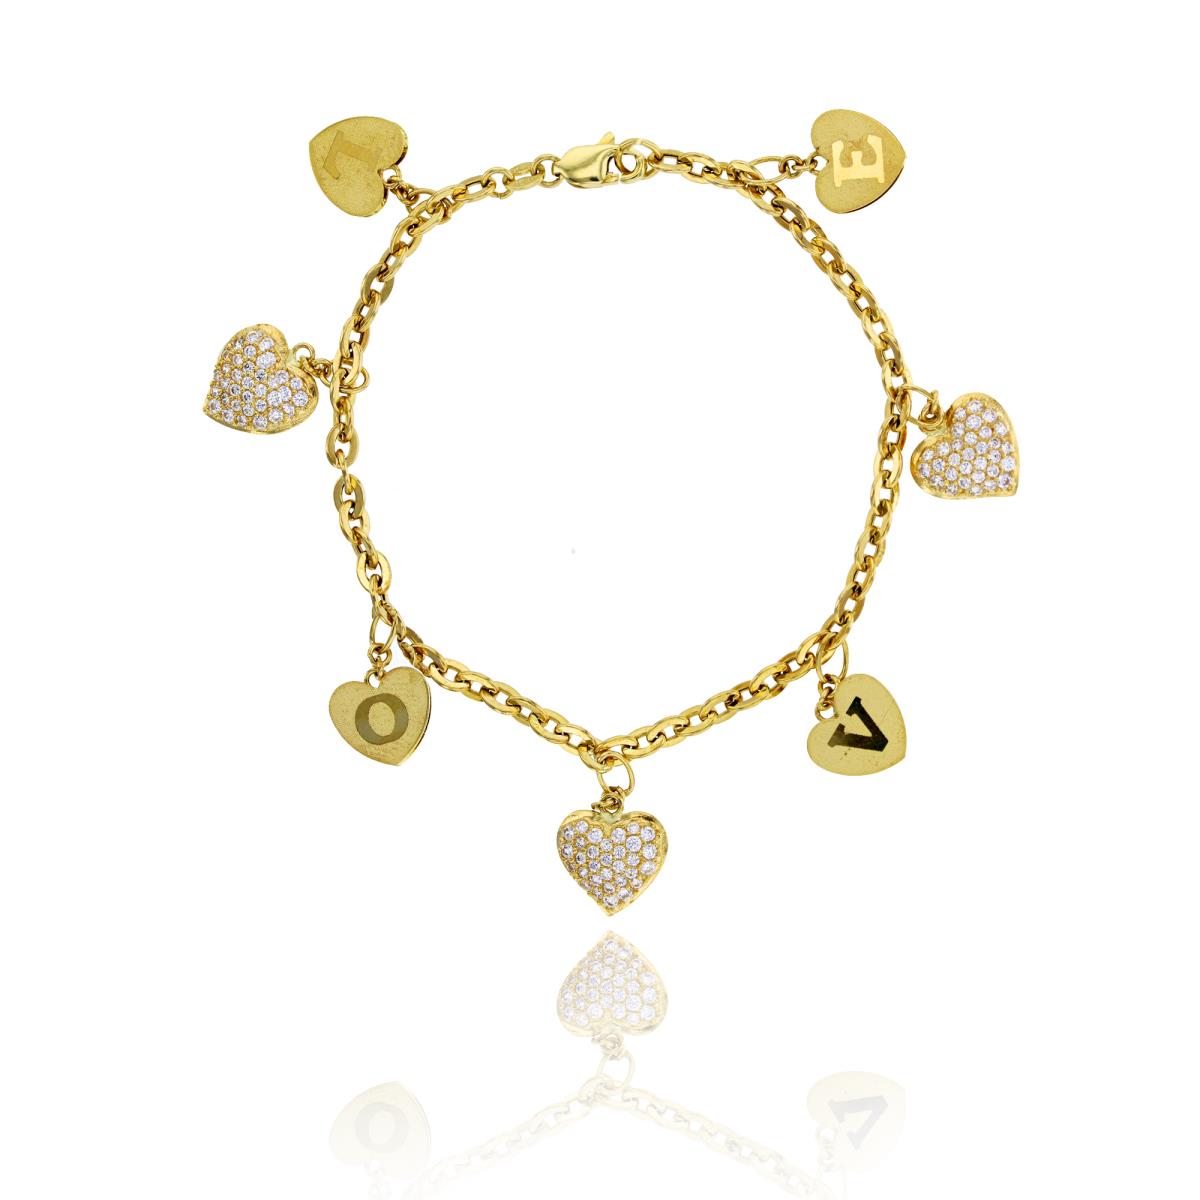 14K Yellow Gold LOVE Heart Charm 8" Bracelet with Cubic Zirconia